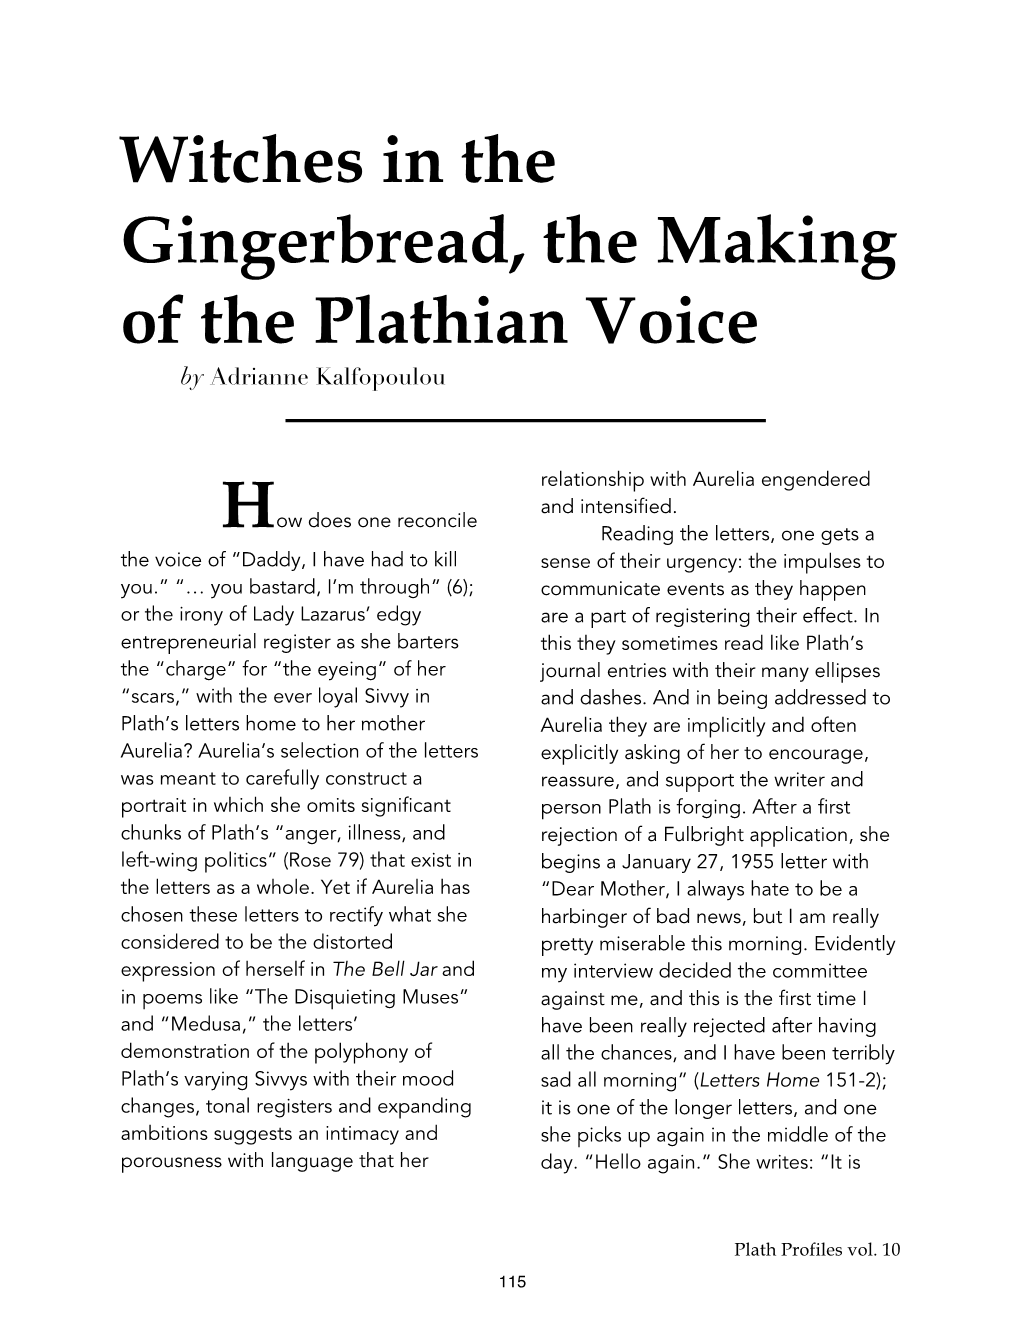 Witches in the Gingerbread, the Making of the Plathian Voice by Adrianne Kalfopoulou